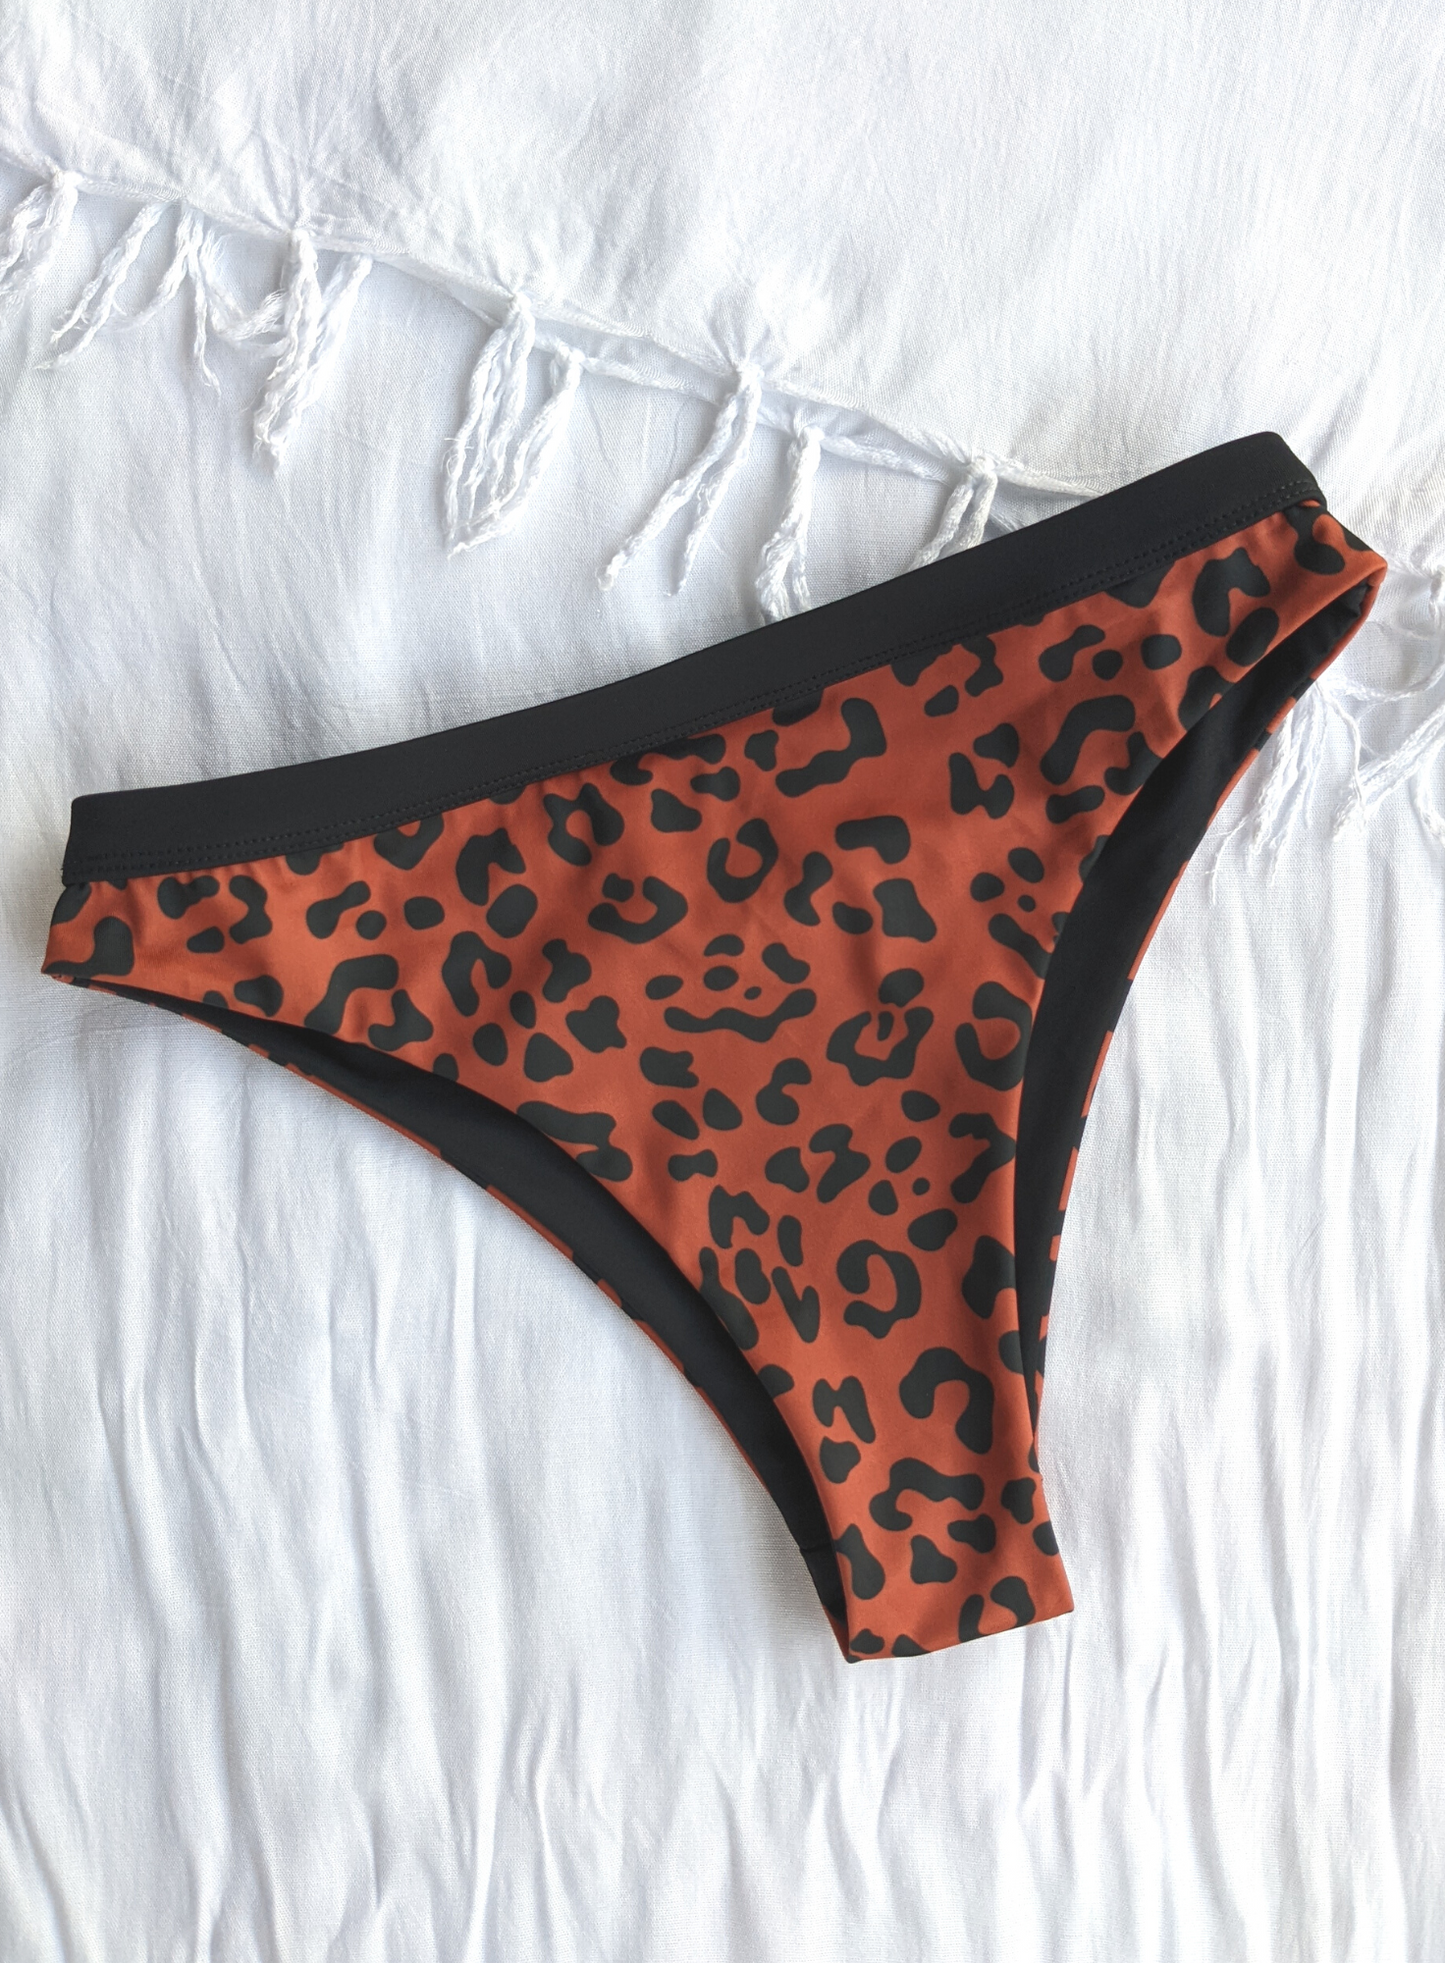 Reversible Black and Leopard Print Medium High Cut Bikini Bottom Made From Eco Friendly Recycled Regenerated Fabric Leopard Front Flat Lay View